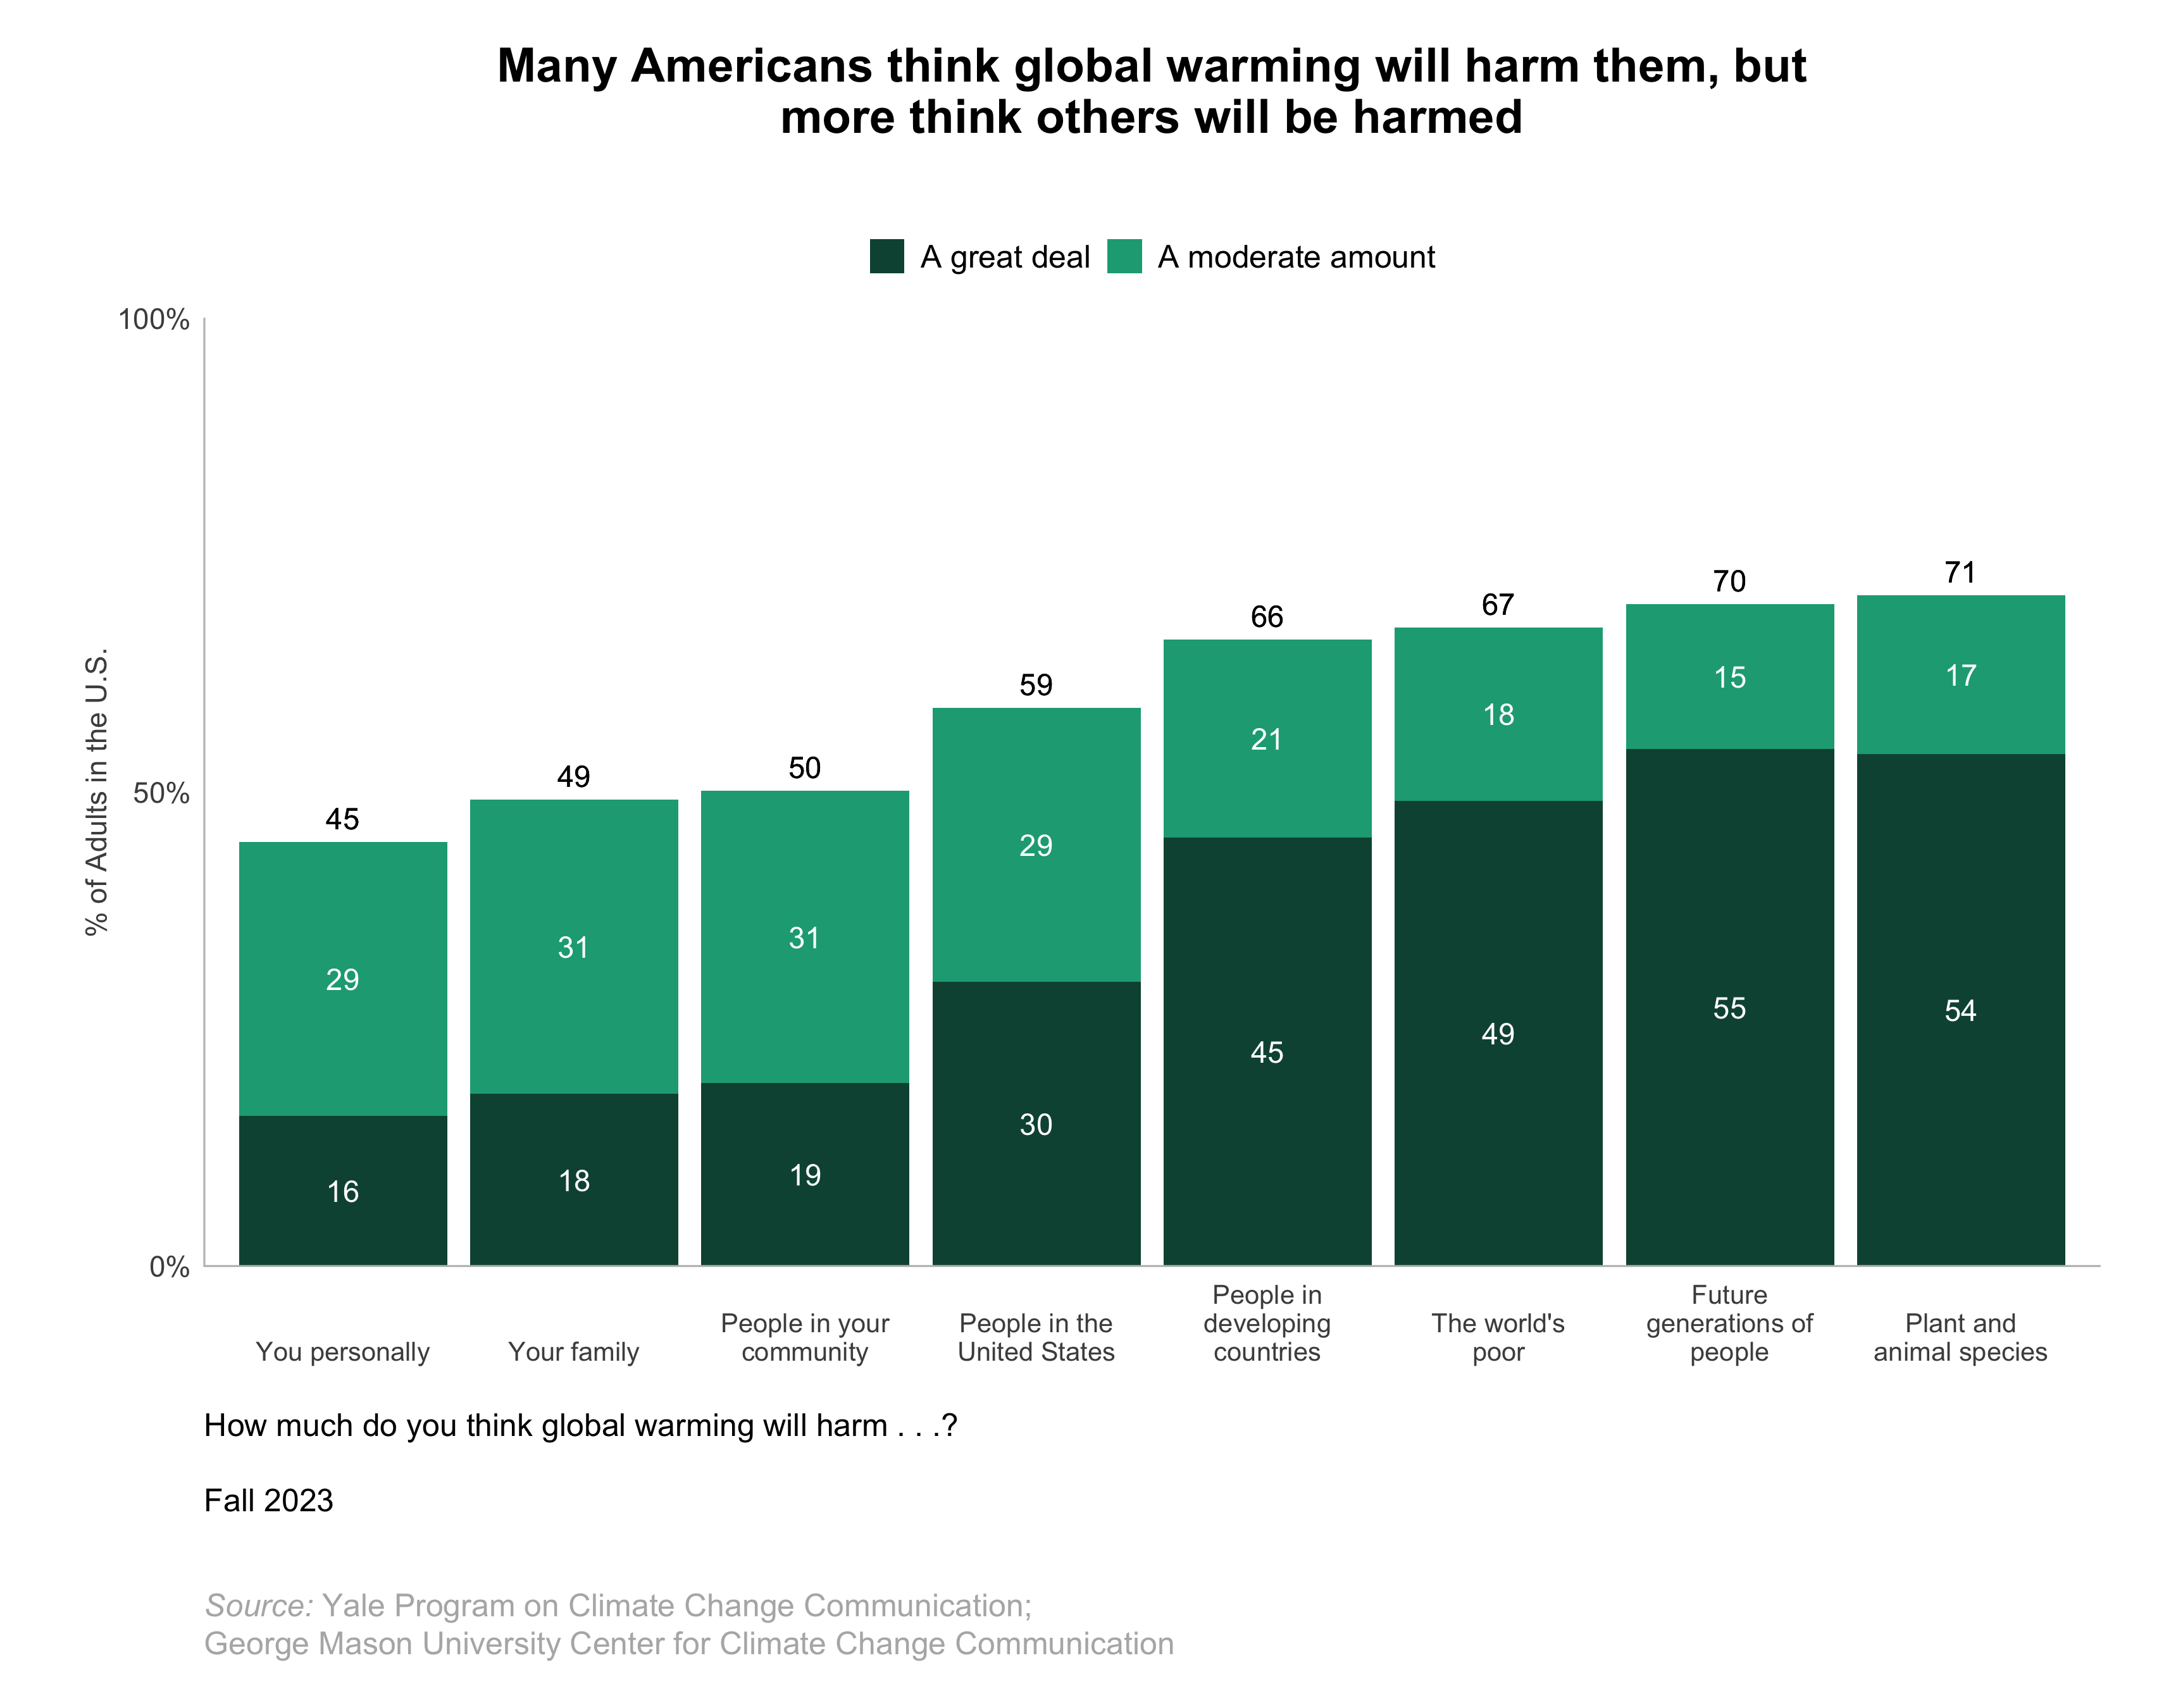 These bar charts show the percentage of Americans who think global warming will harm them or others. Many Americans think global warming will harm them, but more think others will be harmed. Data: Climate Change in the American Mind, Fall 2023. Refer to the data tables in Appendix 1 of the report for all percentages.